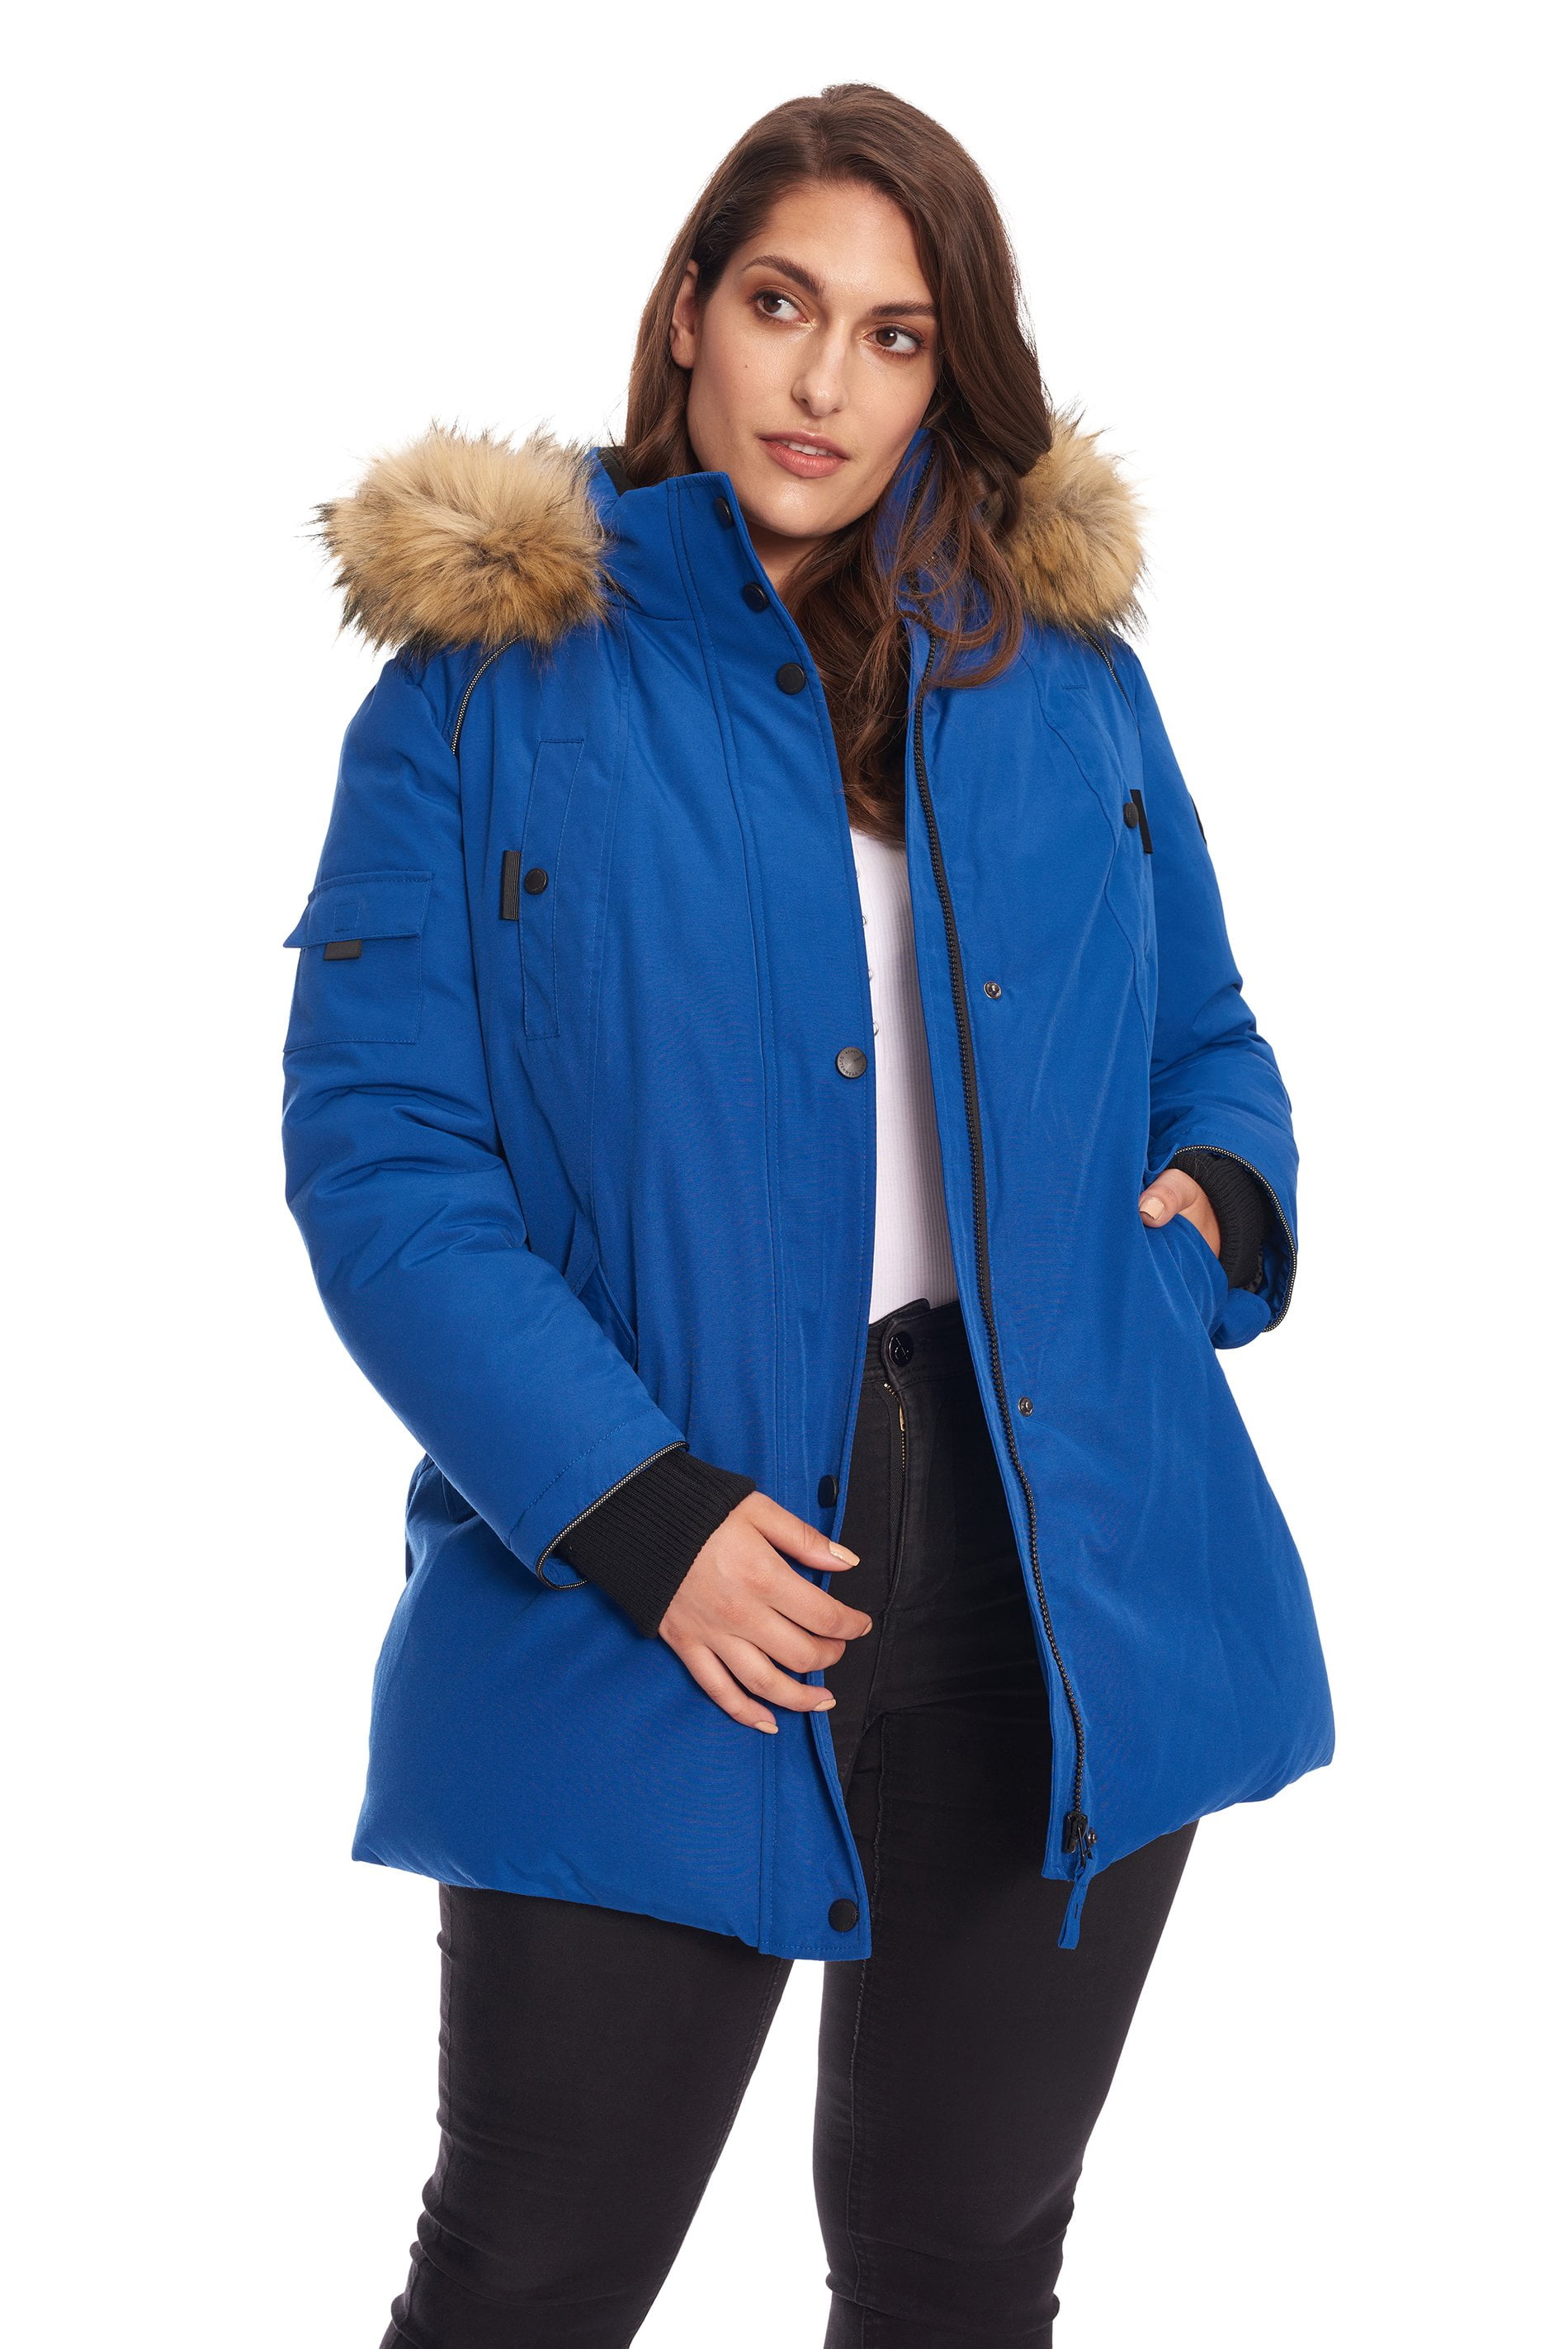 Alpine North Women S Vegan Down Parka With Faux Fur Hood Plus Size Warm Insulated Winter